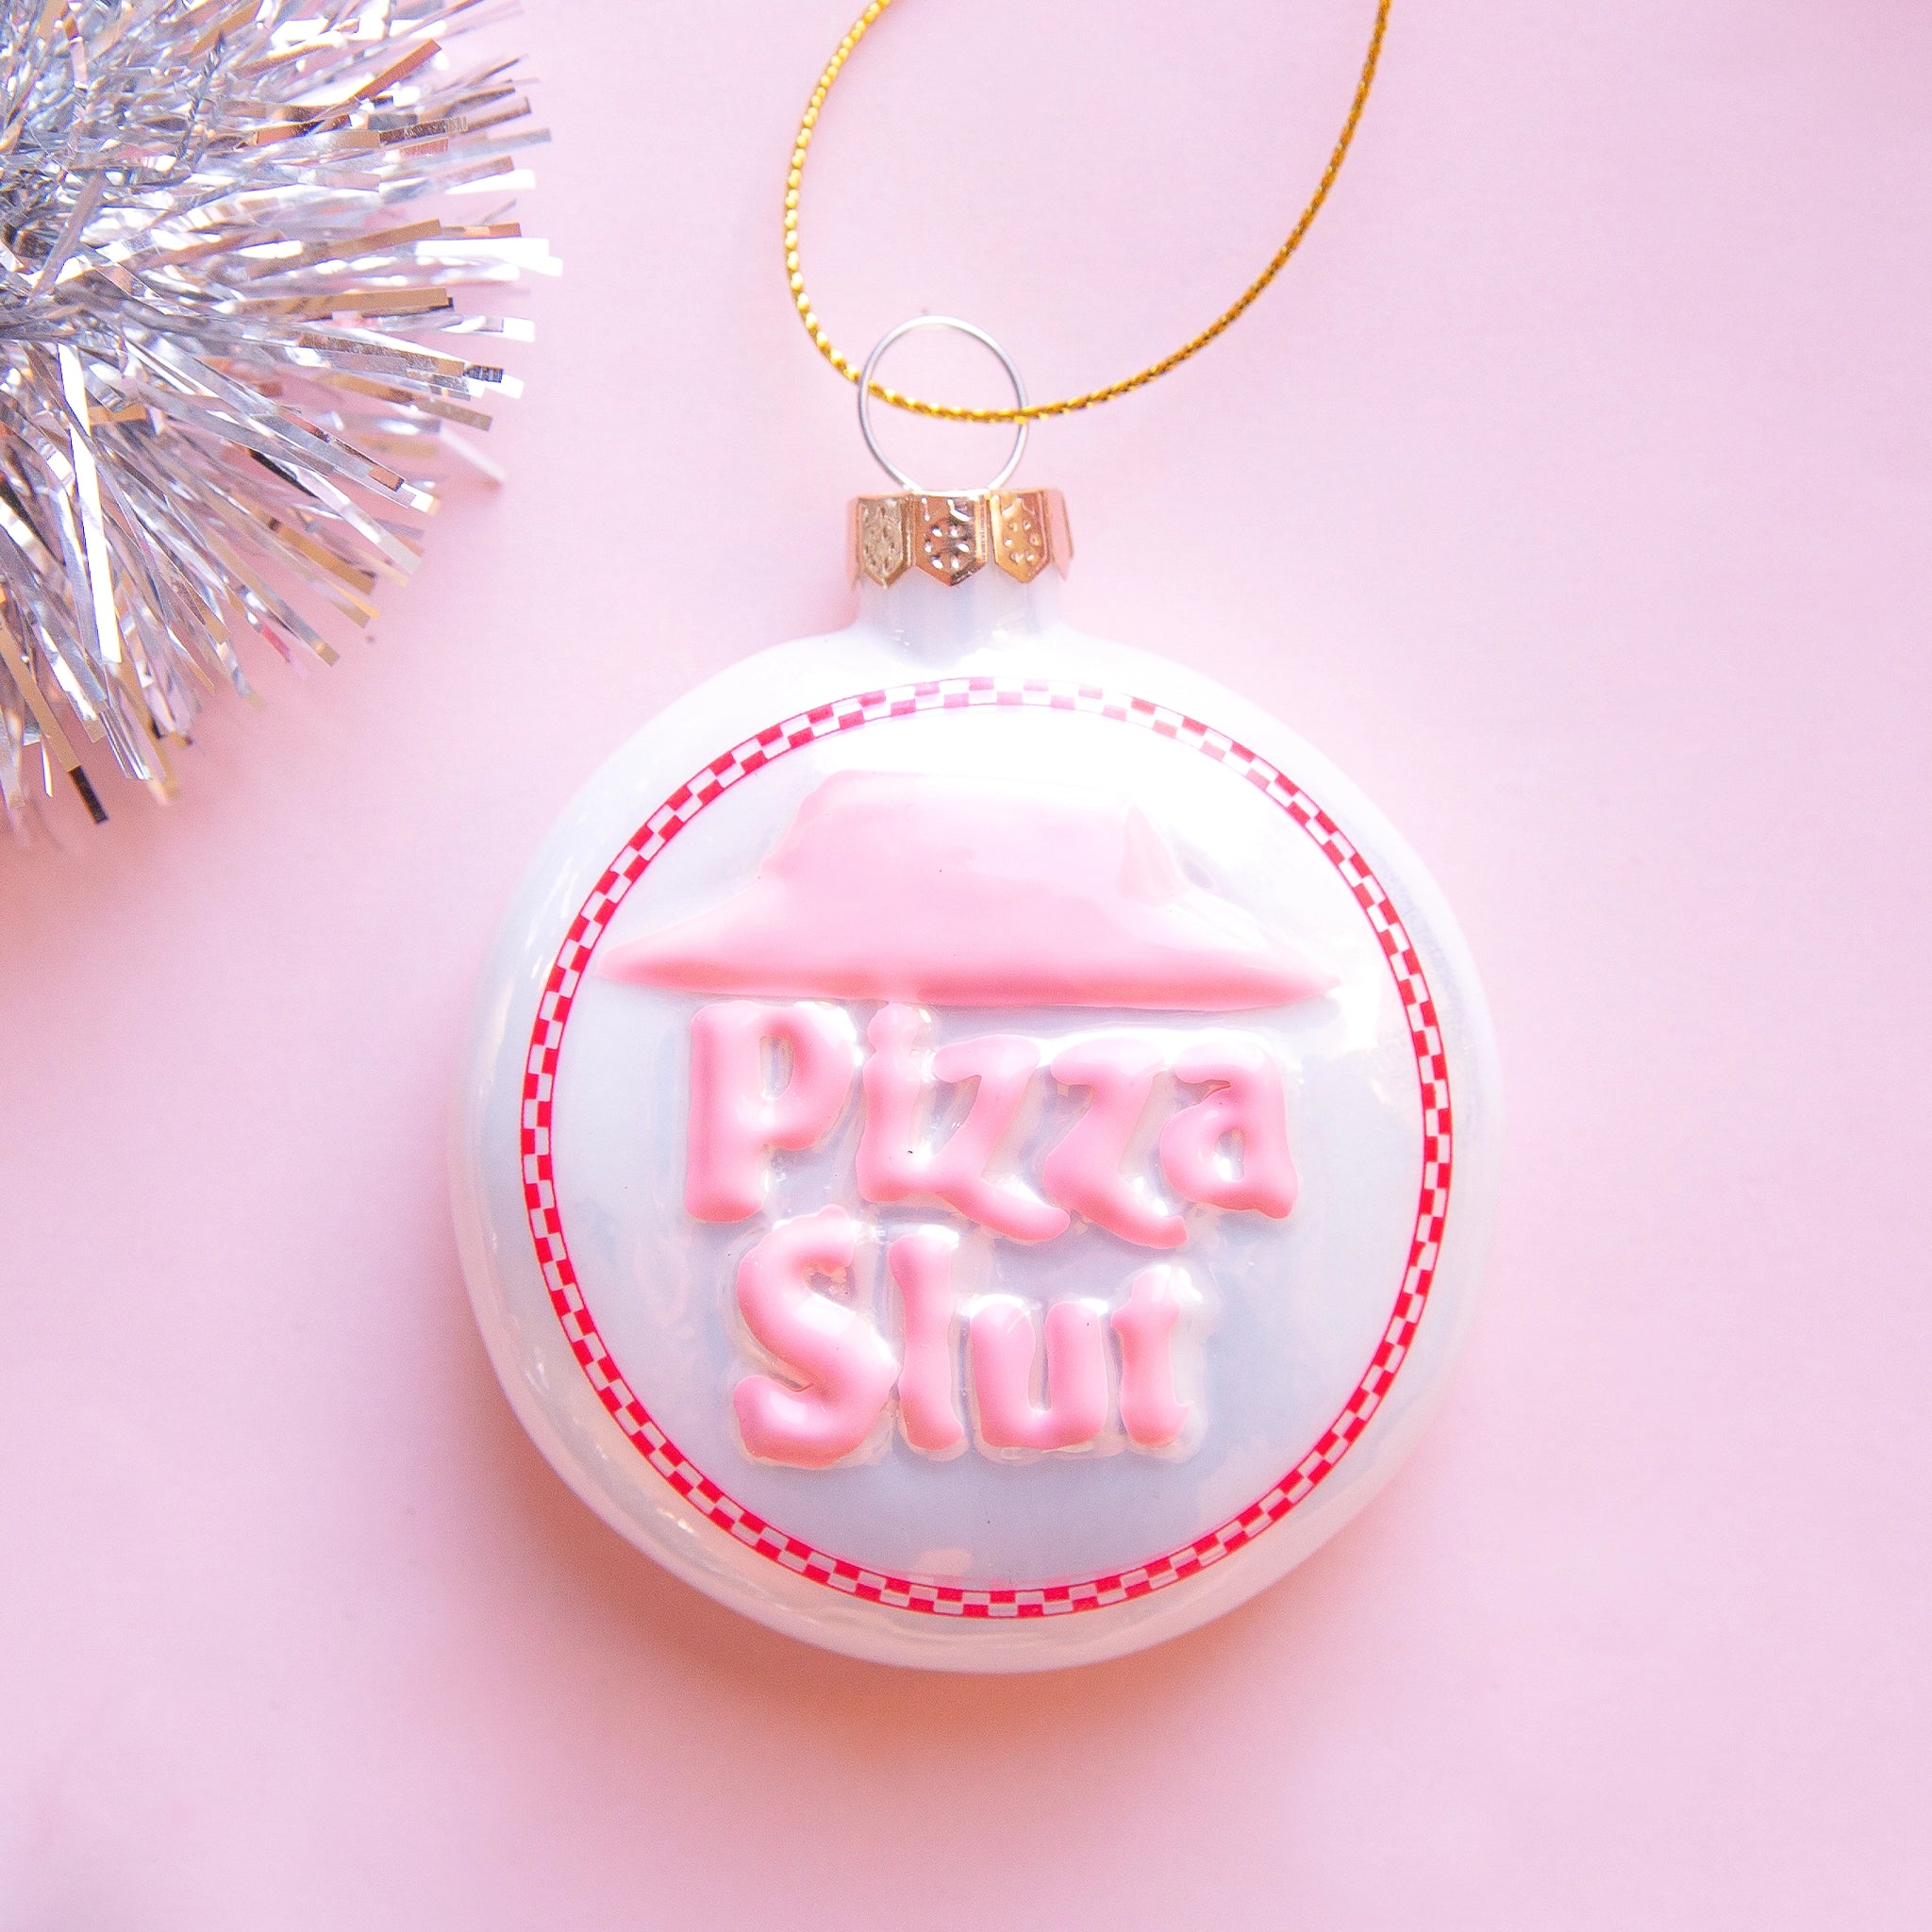 On a pink snowy background is a white and pink circle glass ornament that has text in the center that reads, &quot;Pizza Slut&quot;.